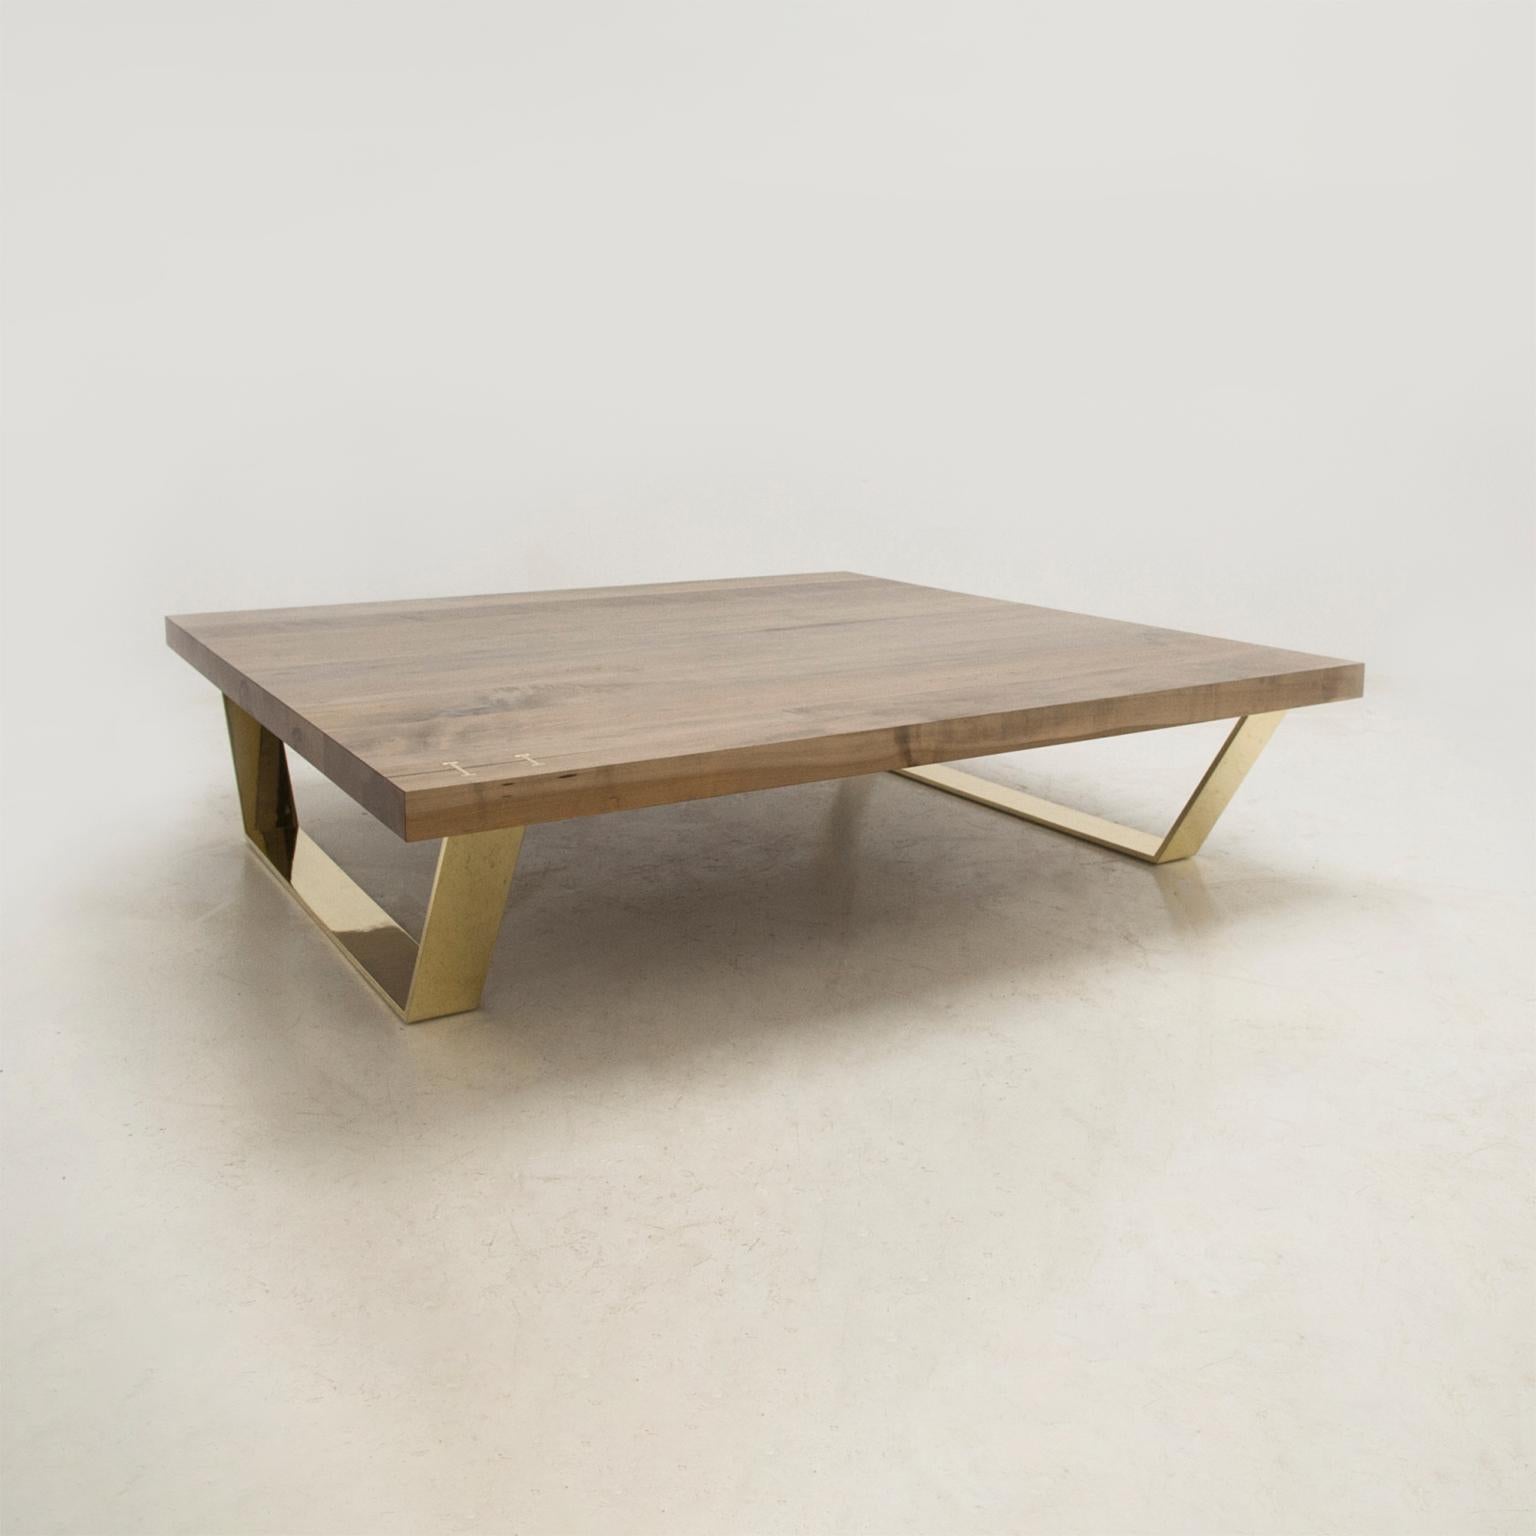 Modern Low Table Oxidized Domestic Hardwood by Stacklab - Contemporary For Sale